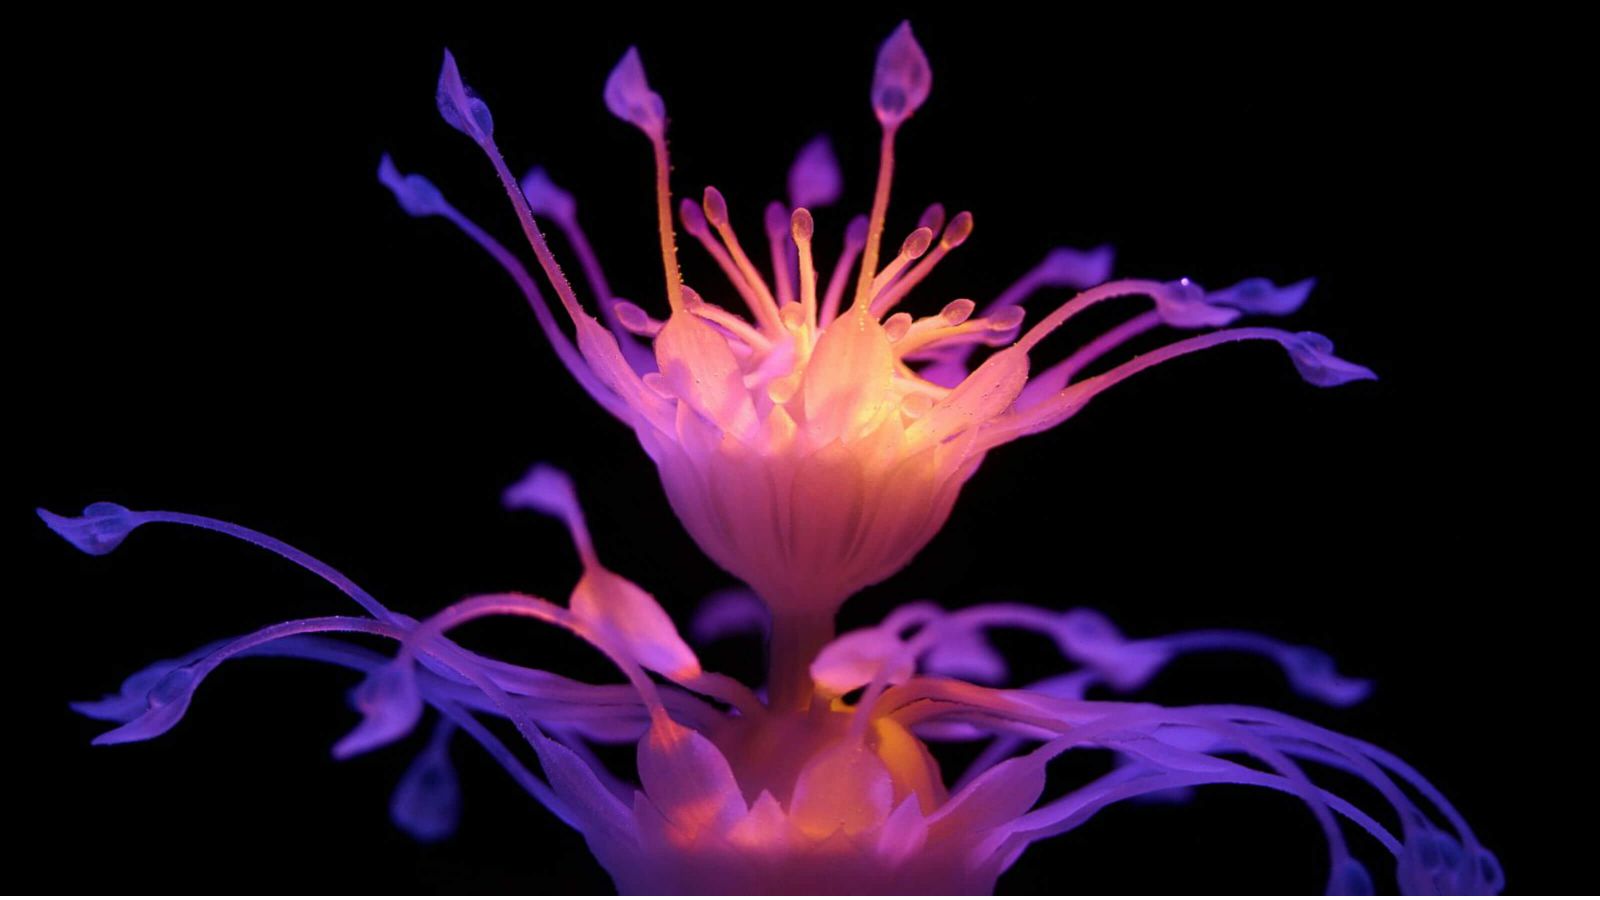 A four-dimensionally rendered and exotic-violet hydrophyte against a pitch black backdrop.